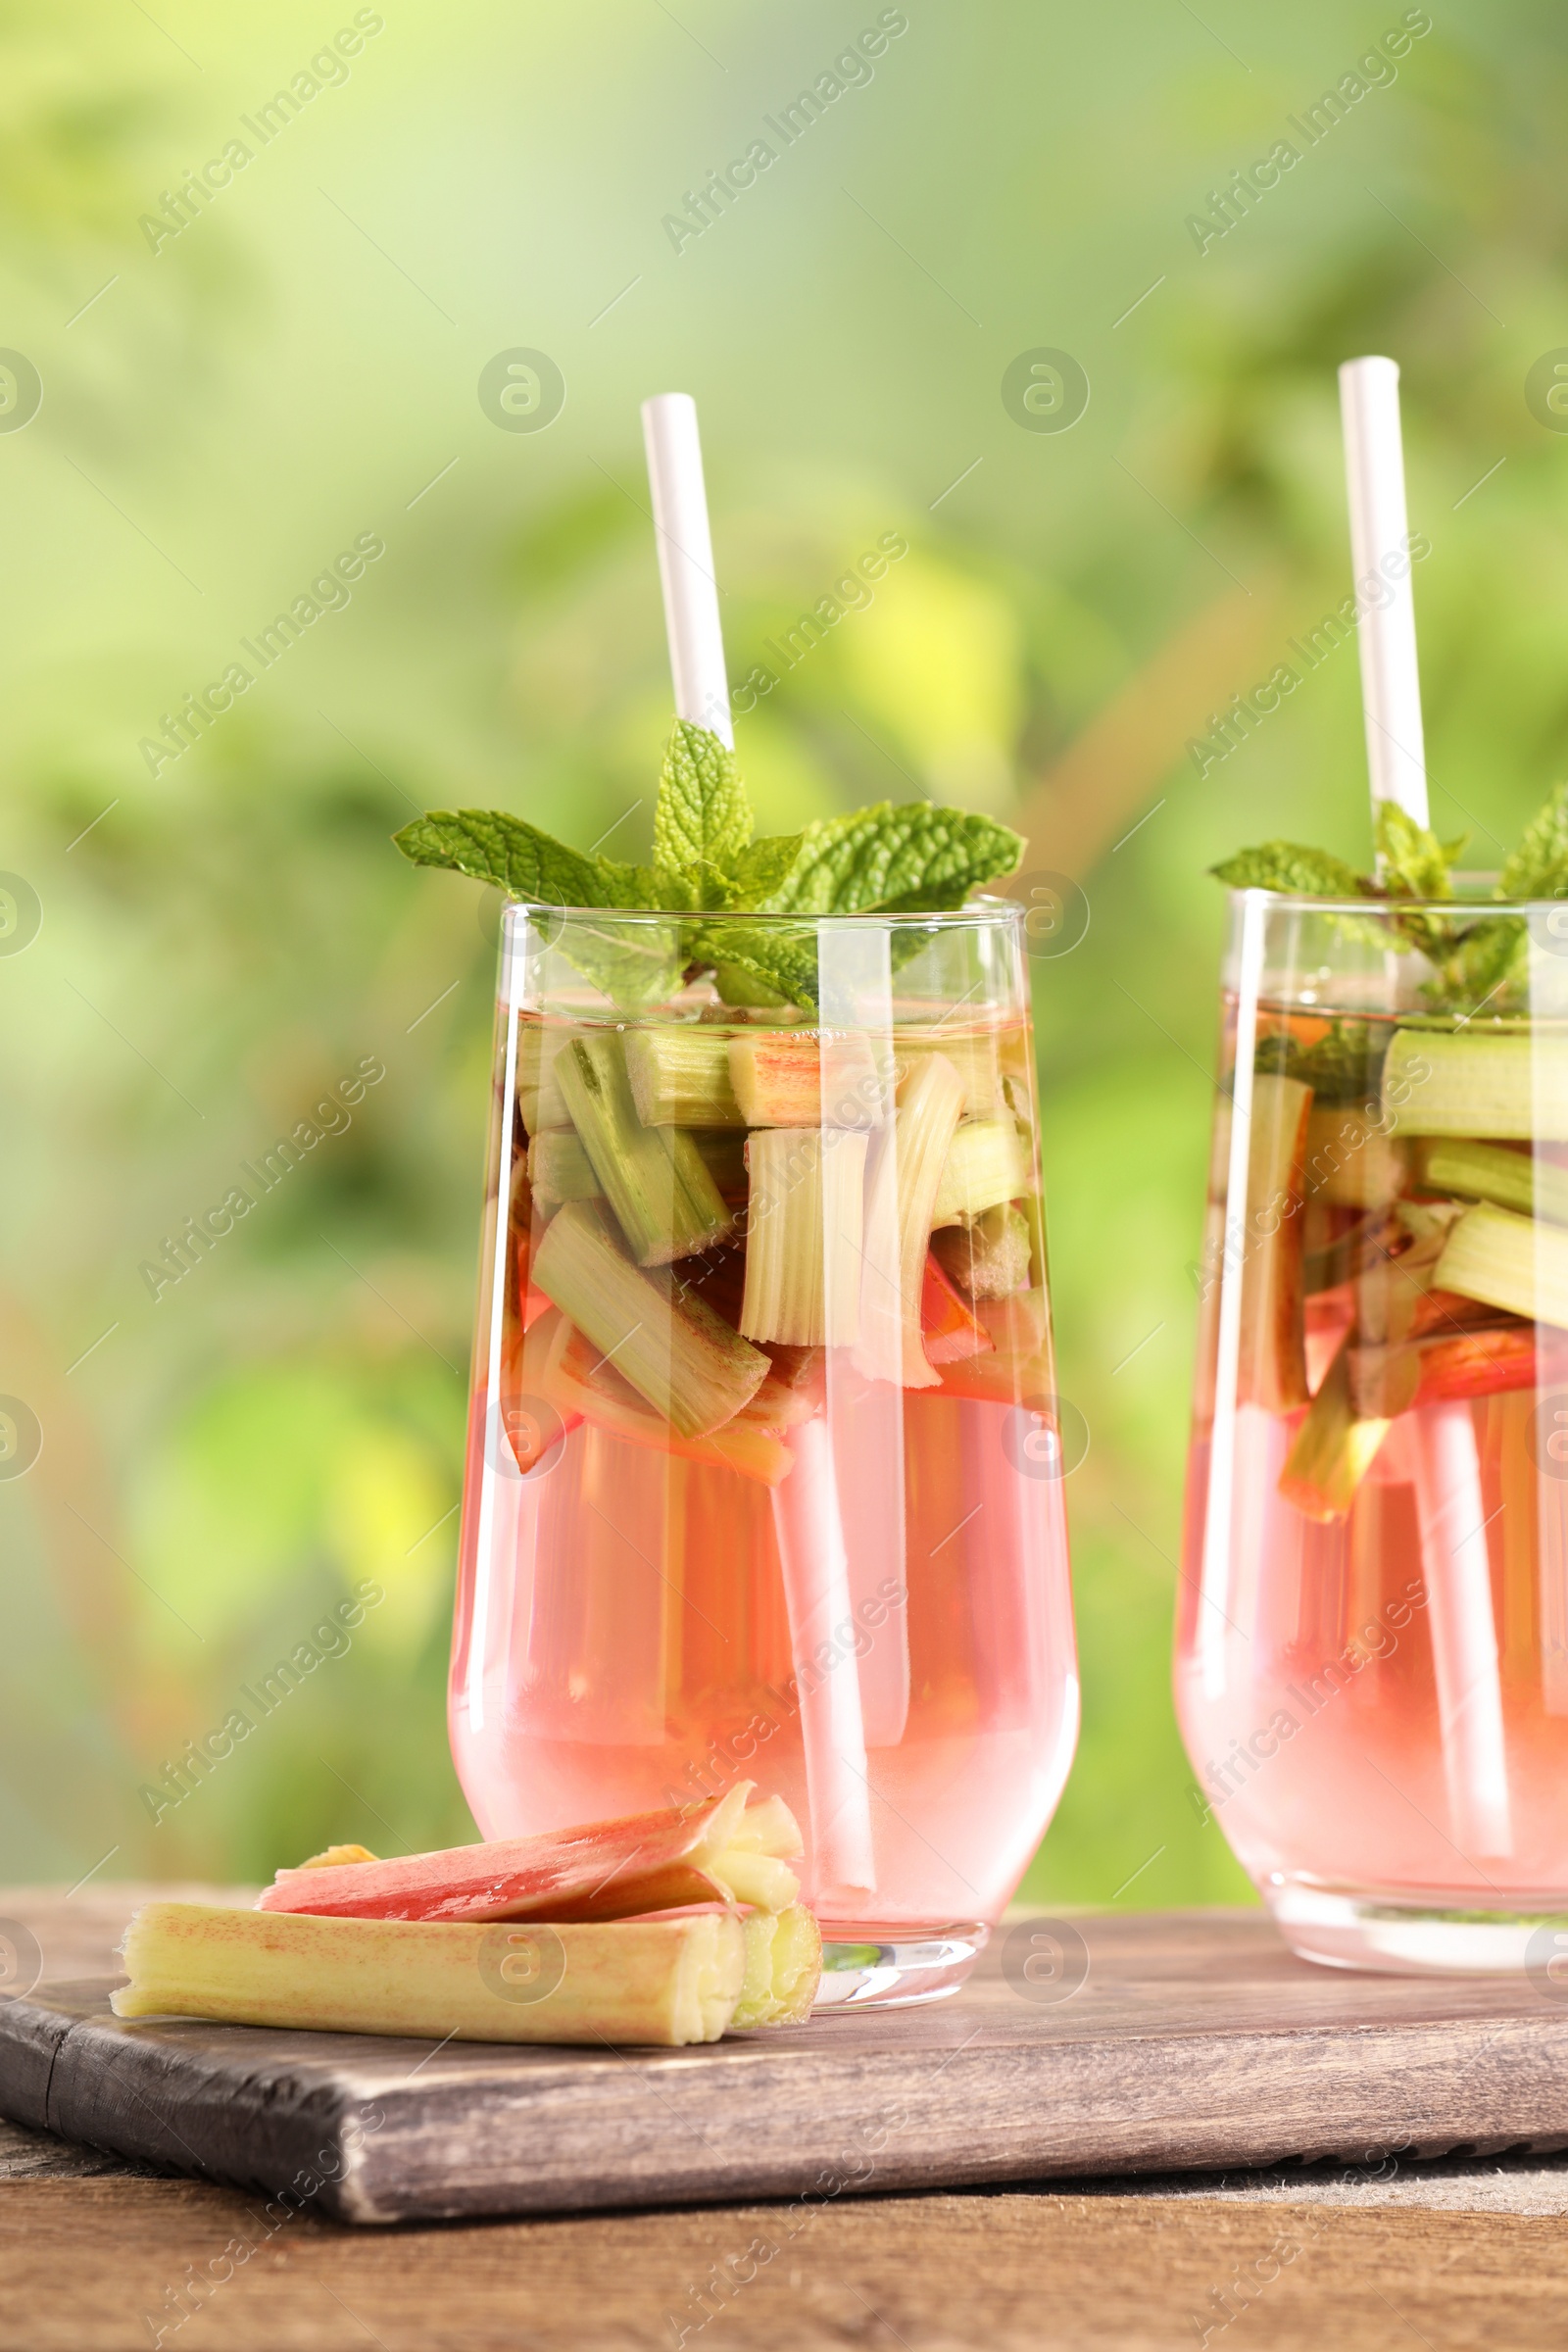 Photo of Glasses of tasty rhubarb cocktail on wooden table outdoors